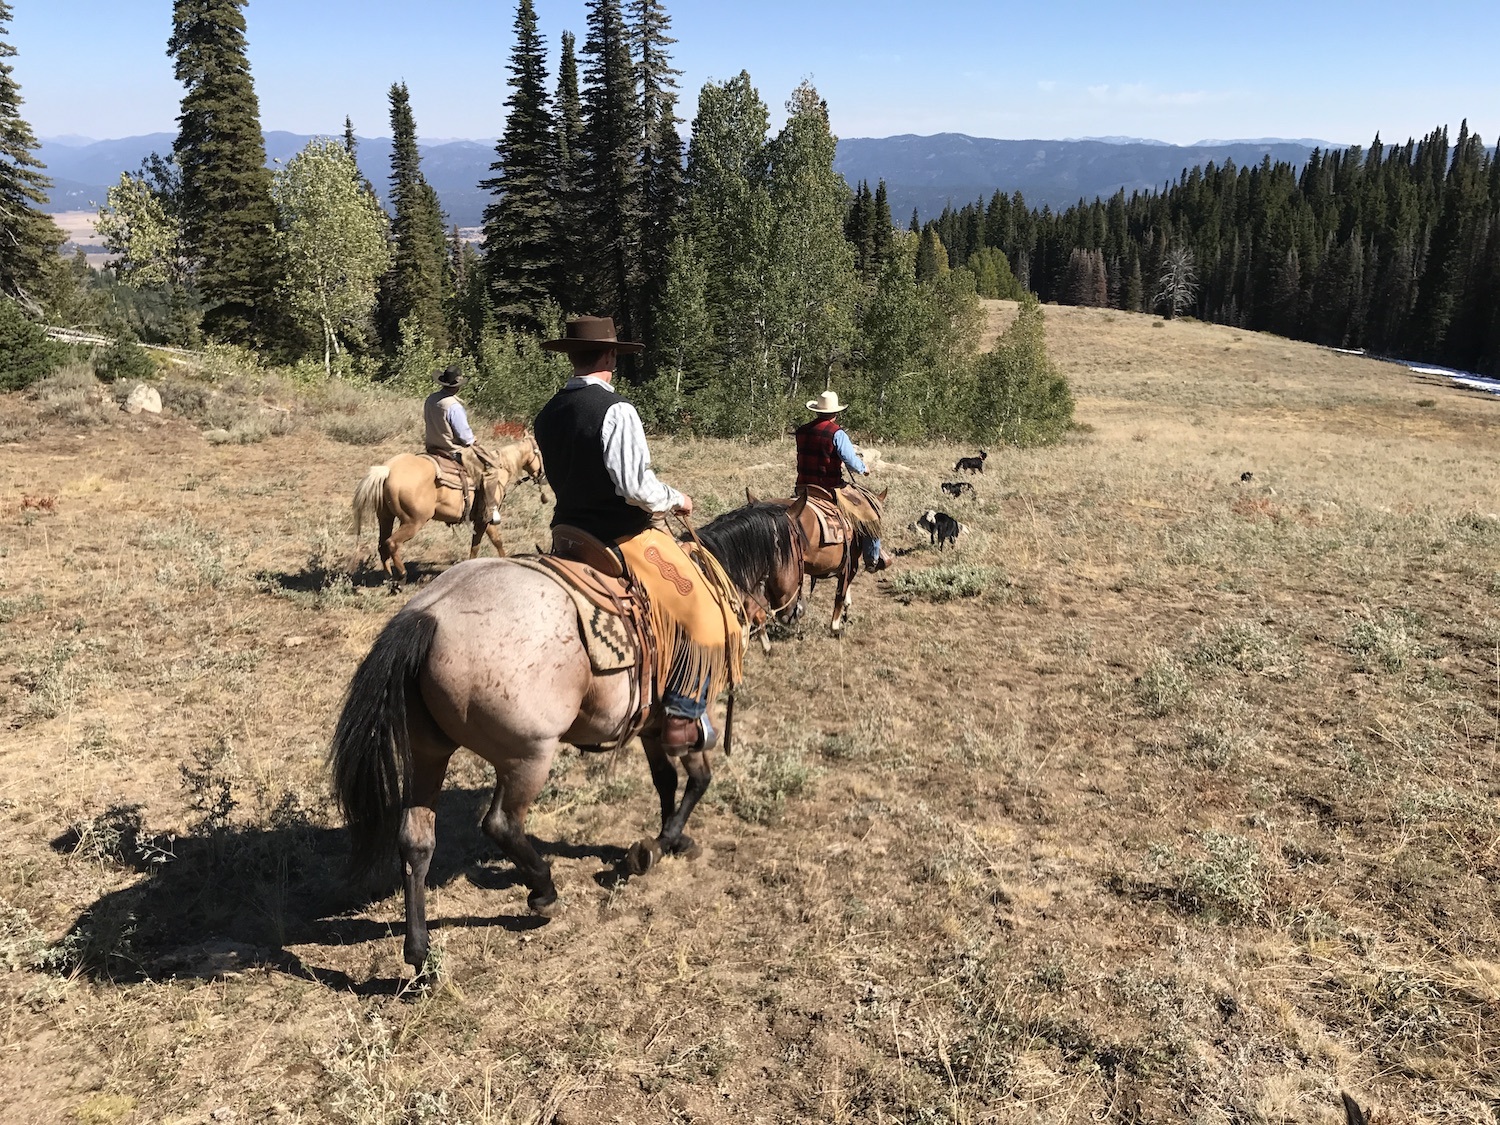 3 people on horseback trailing down side of a hill April 2020